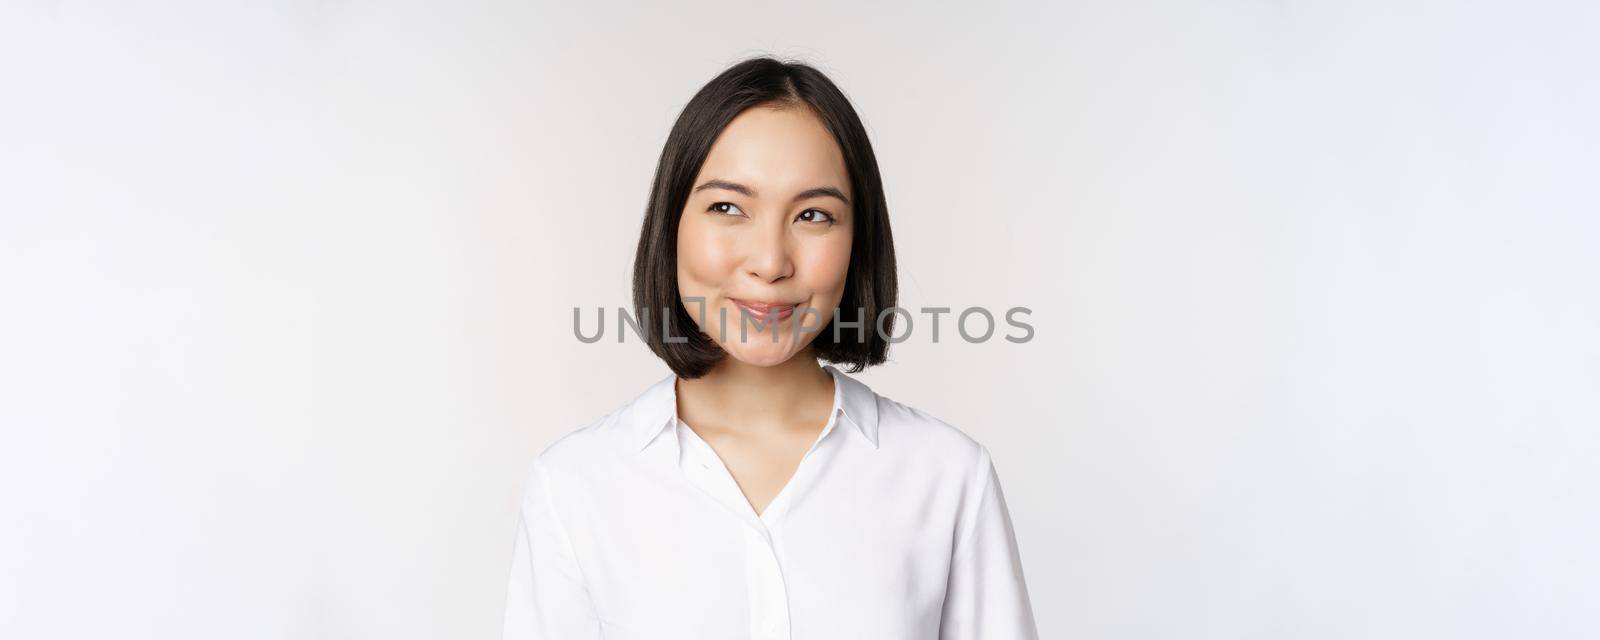 Image of smiling asian woman planning, thinking of smth, daydreaming, standing over white background with smug face. Copy space